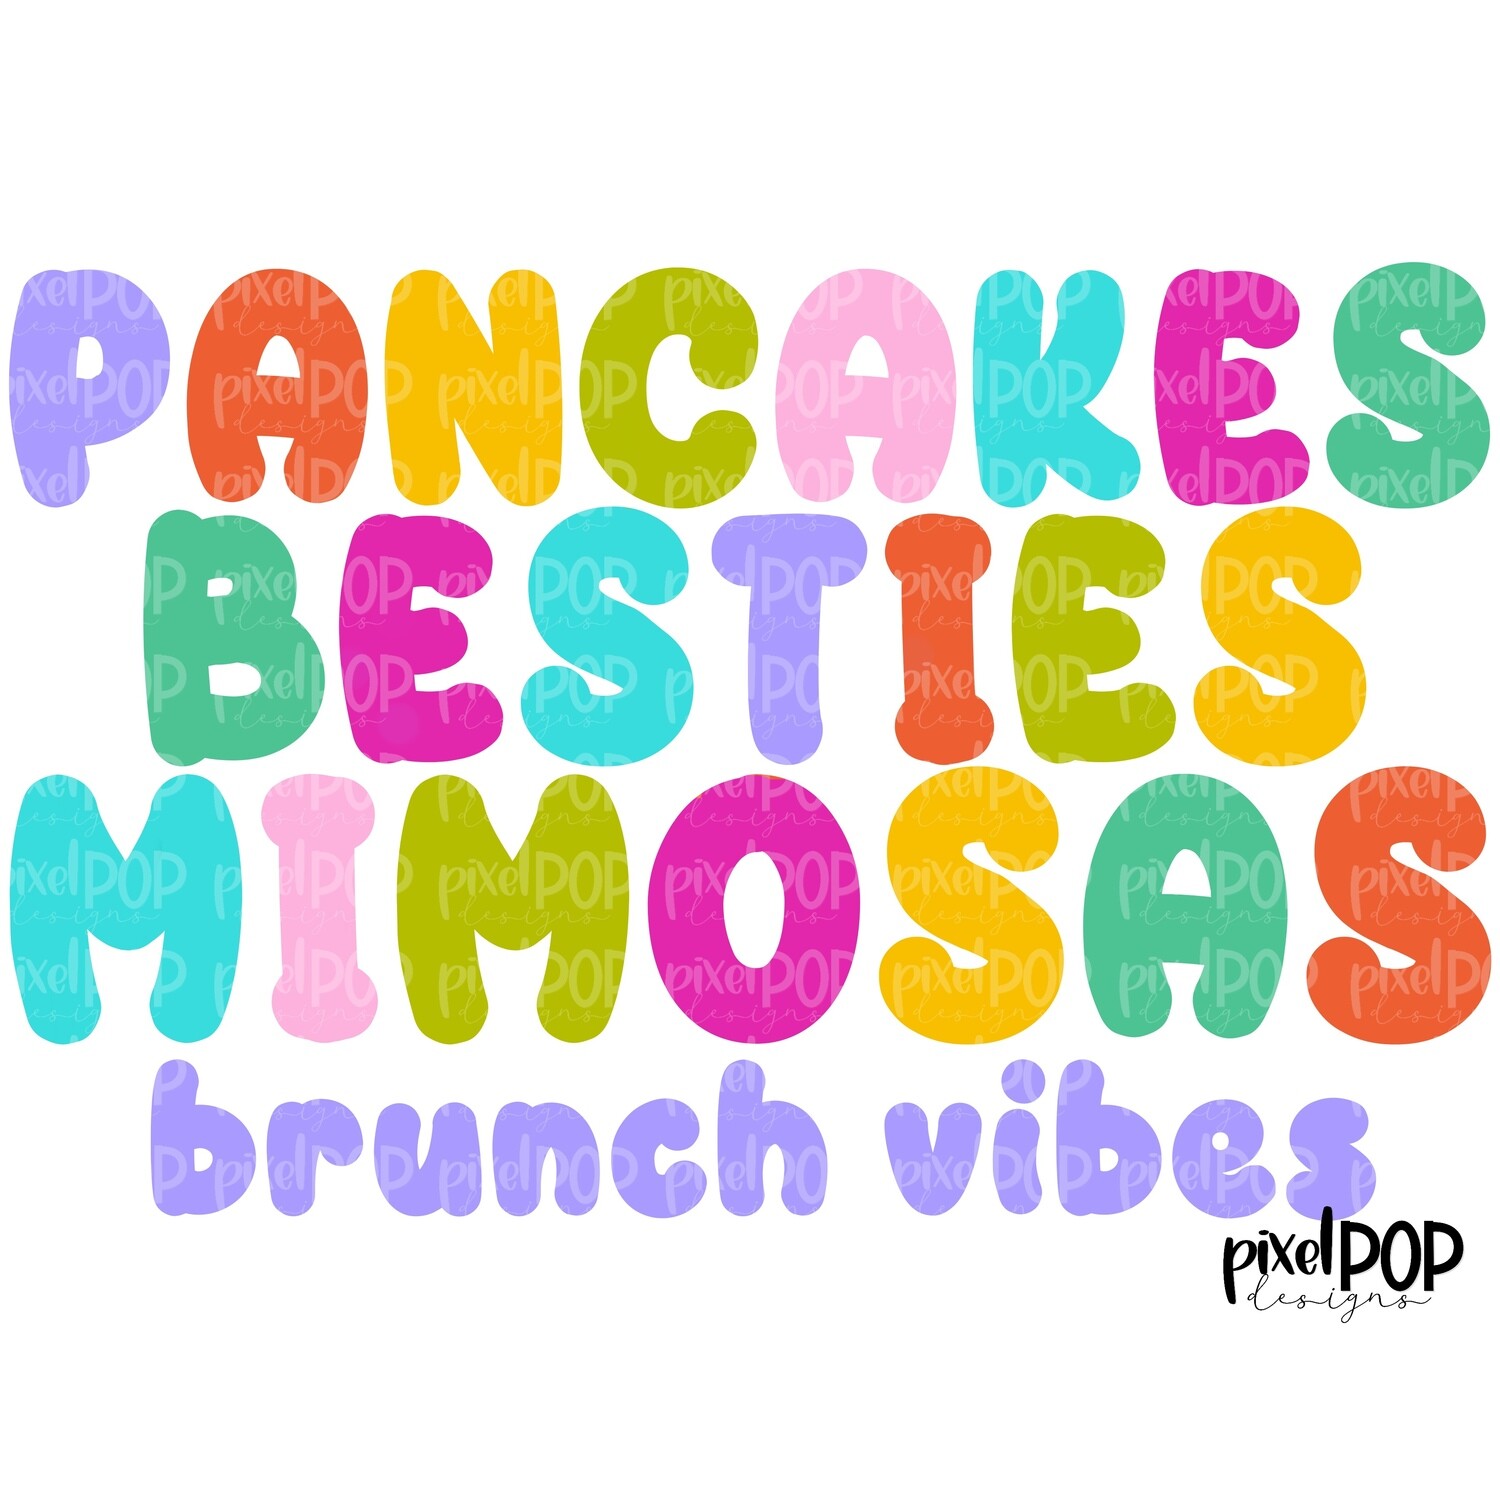 Brunch Vibes Colorful PNG | Brunch | Mimosa  Art | Lunch with Friends | Hand Painted | Breakfast Design | Digital Download | Clip Art